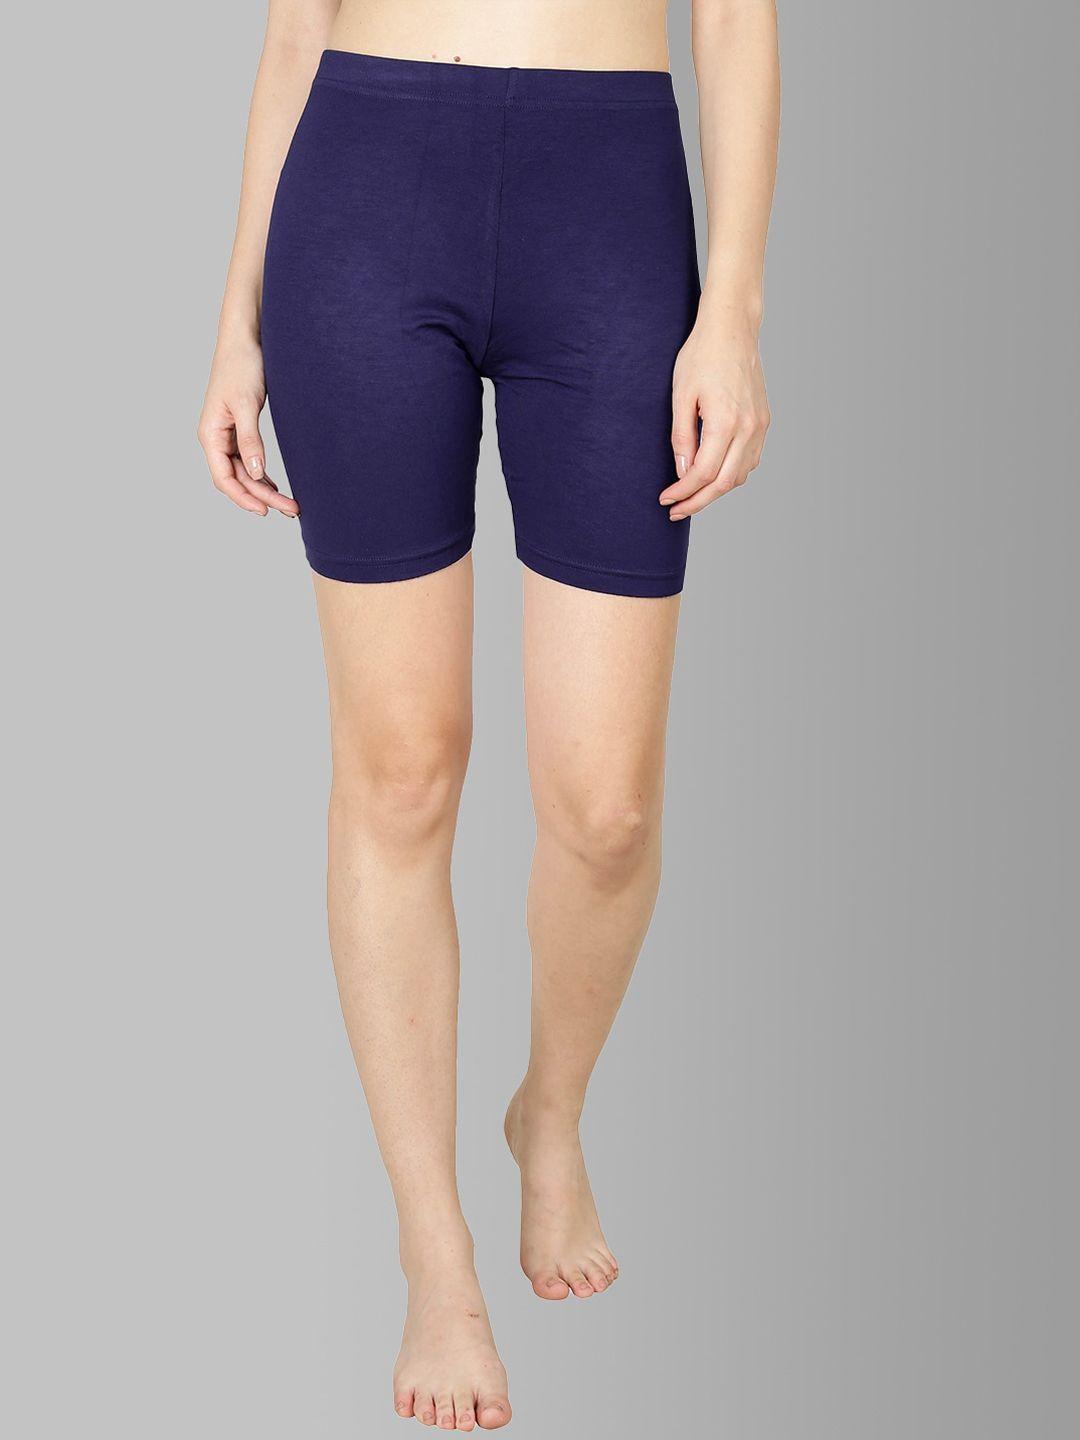 feather soft elite women navy blue skinny fit high-rise cycling sports shorts